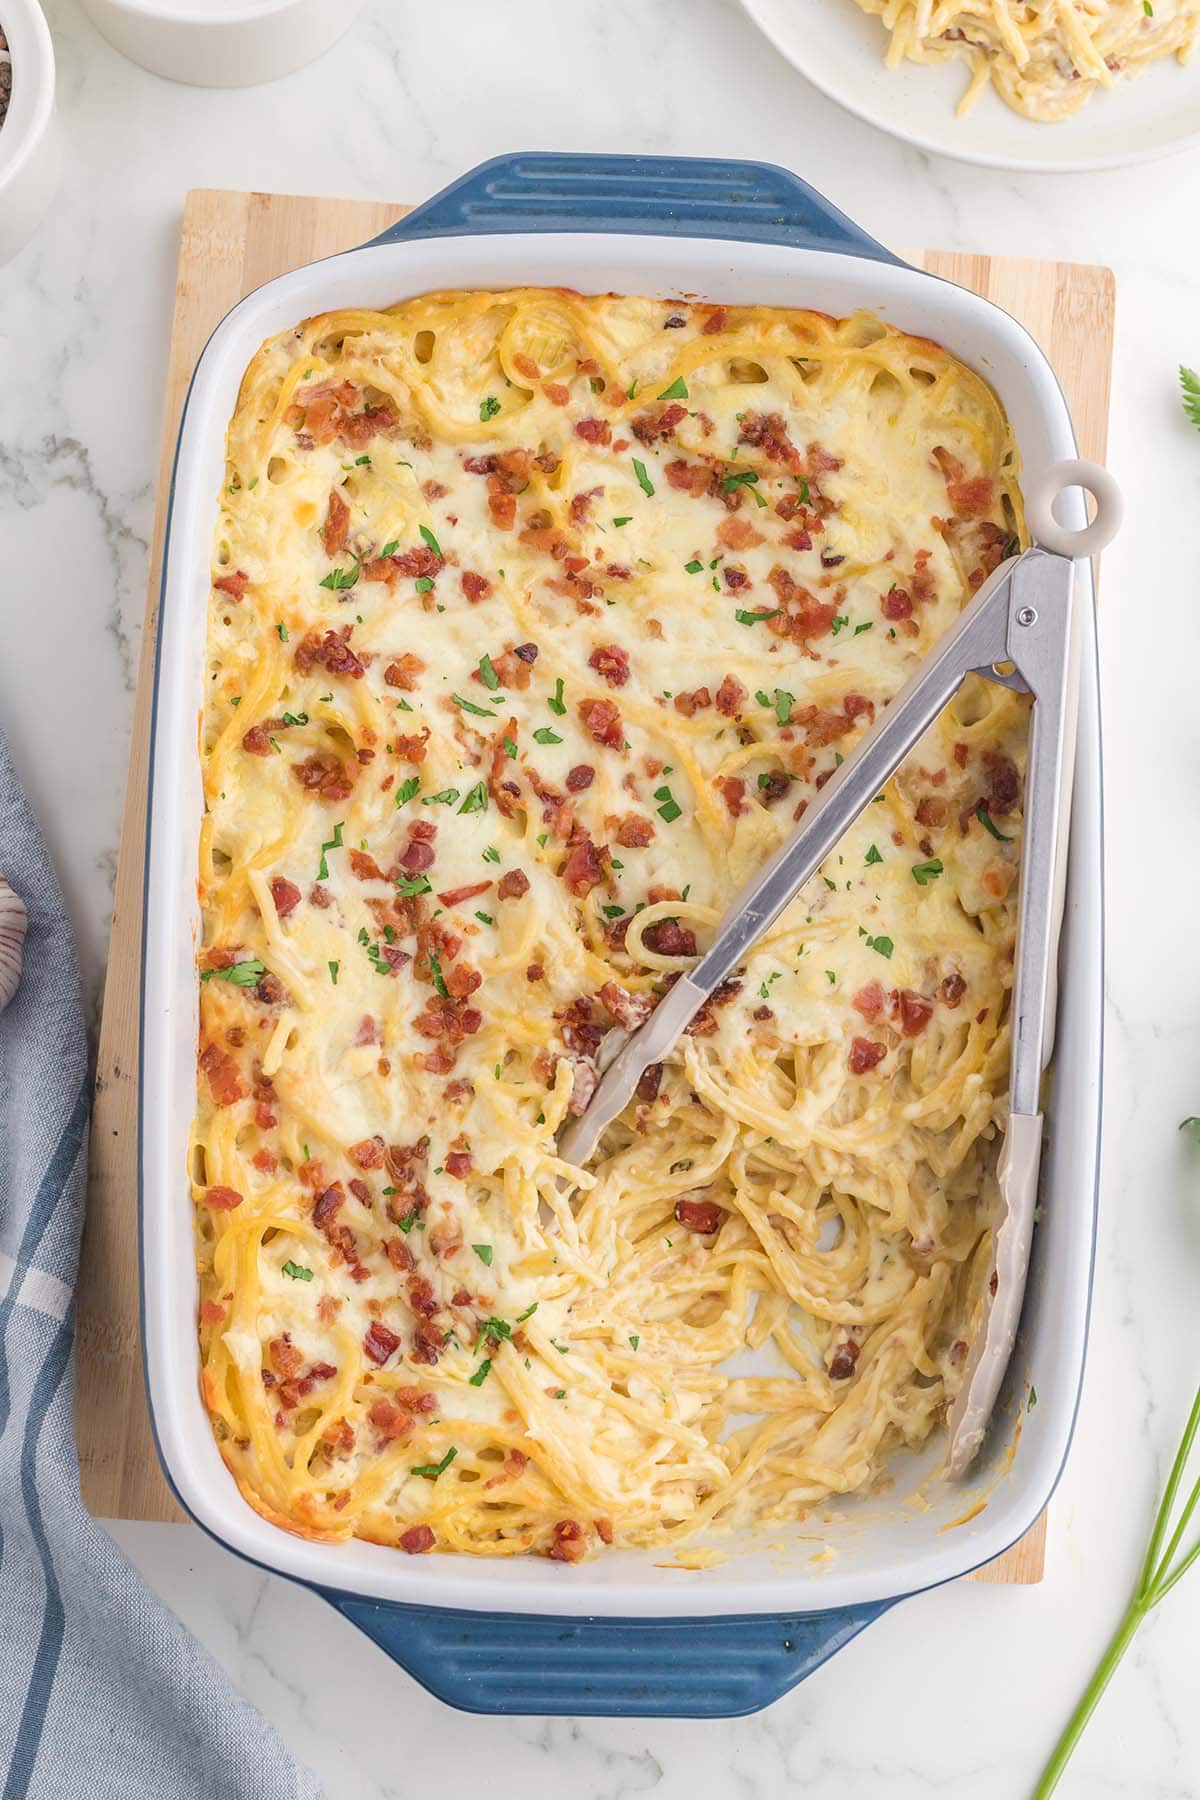 Creamy Bacon Spaghetti in a baking dish with bacon and cheese on top.